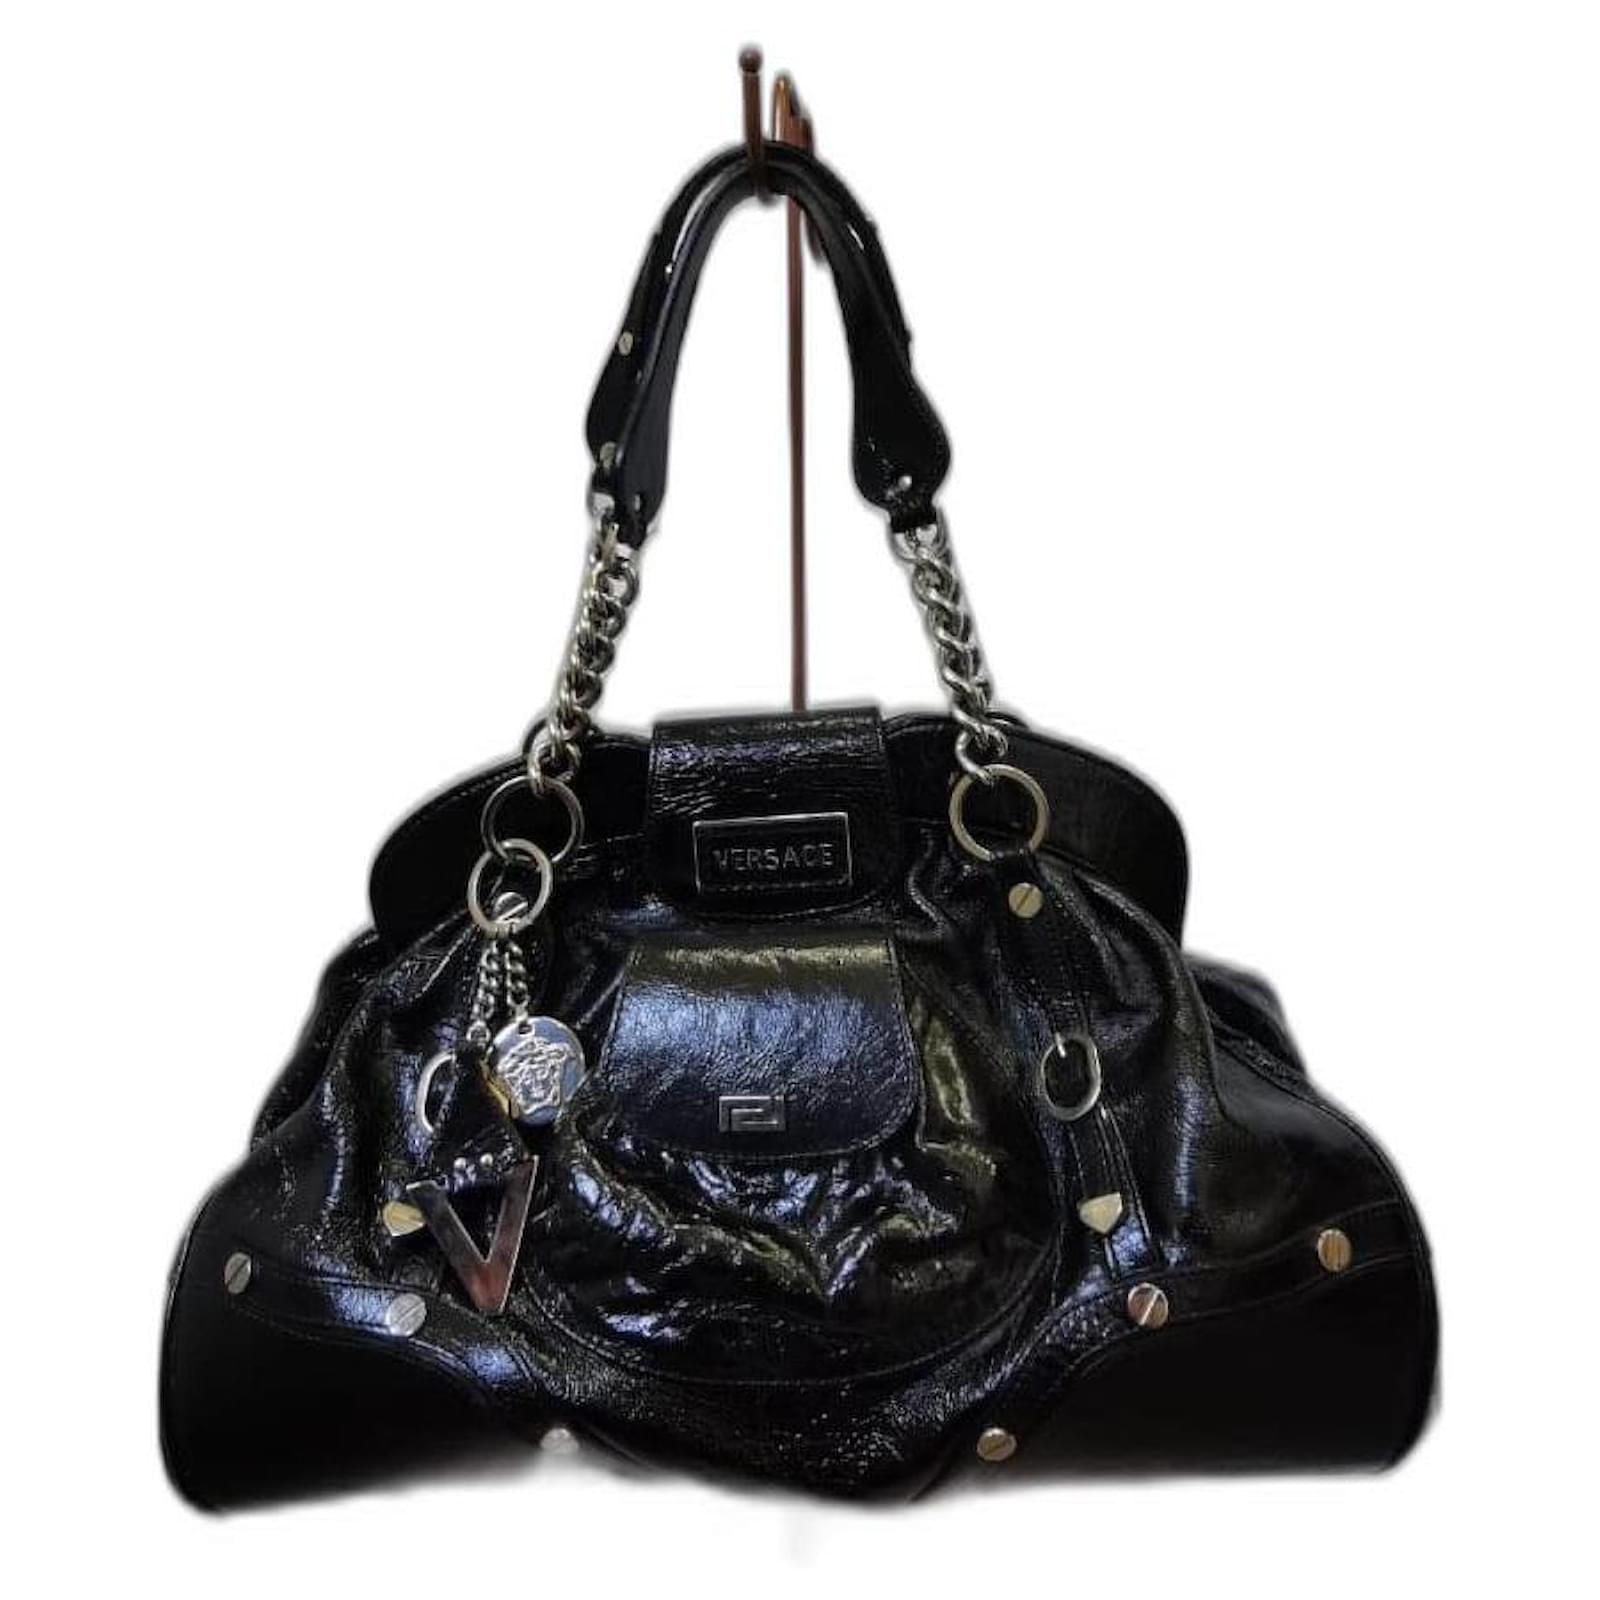 Vintage Gianni Versace Couture Bag with Medusas